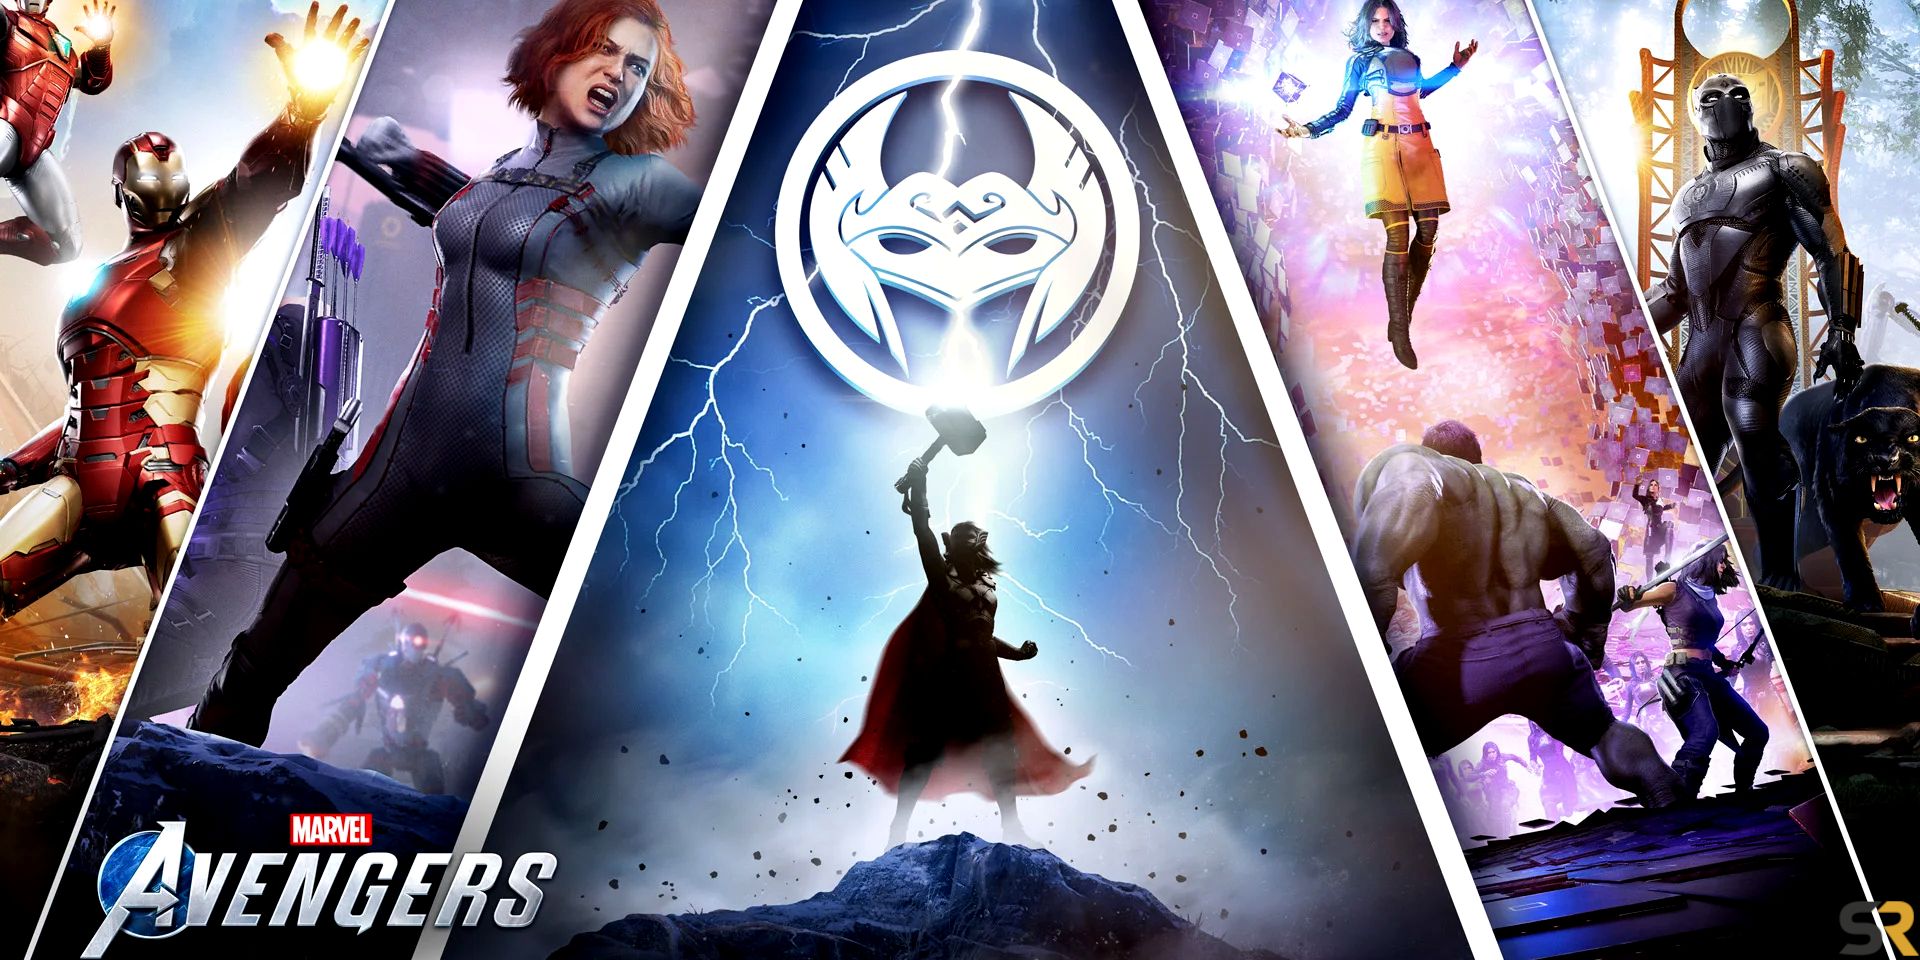 Marvel's Avengers game adding new Jane Foster Thor playable character